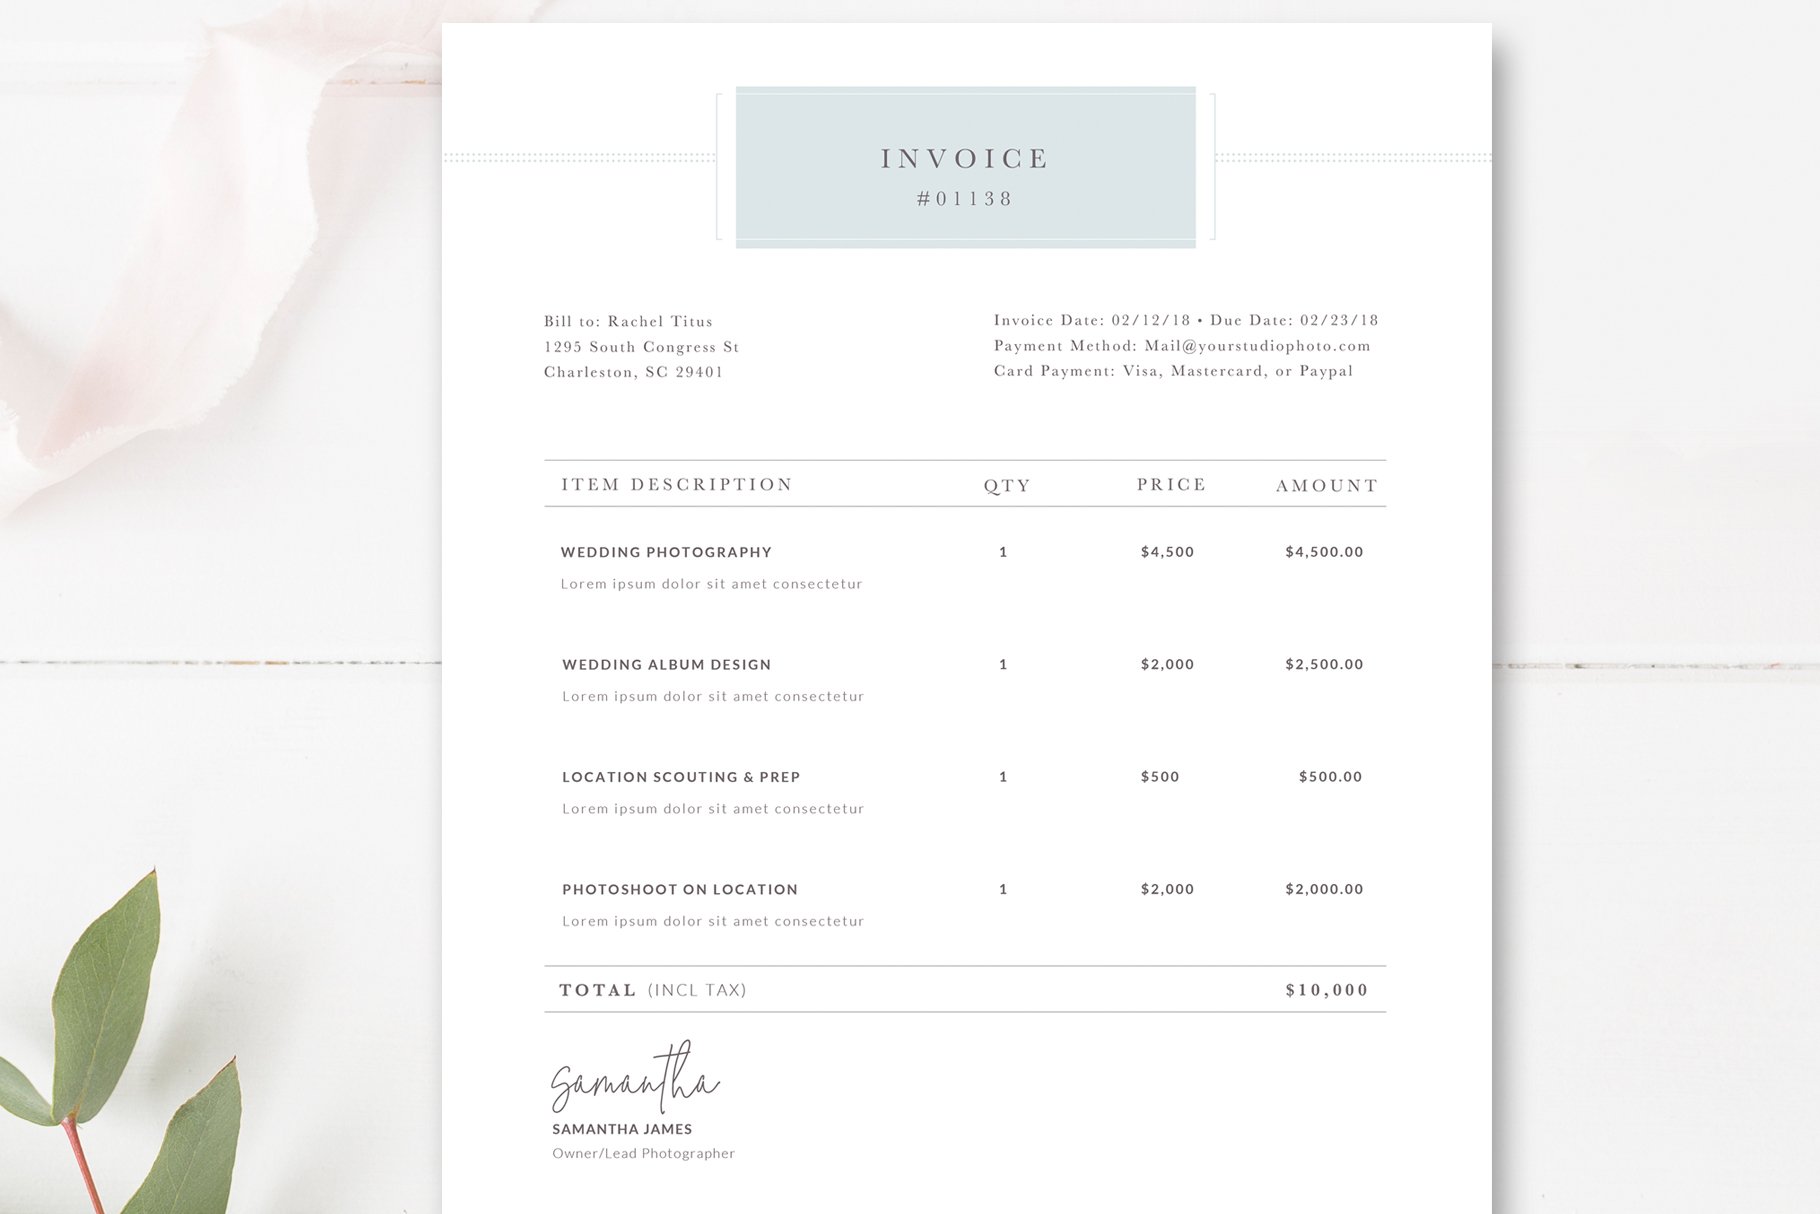 Invoice Receipt for Photographers cover image.